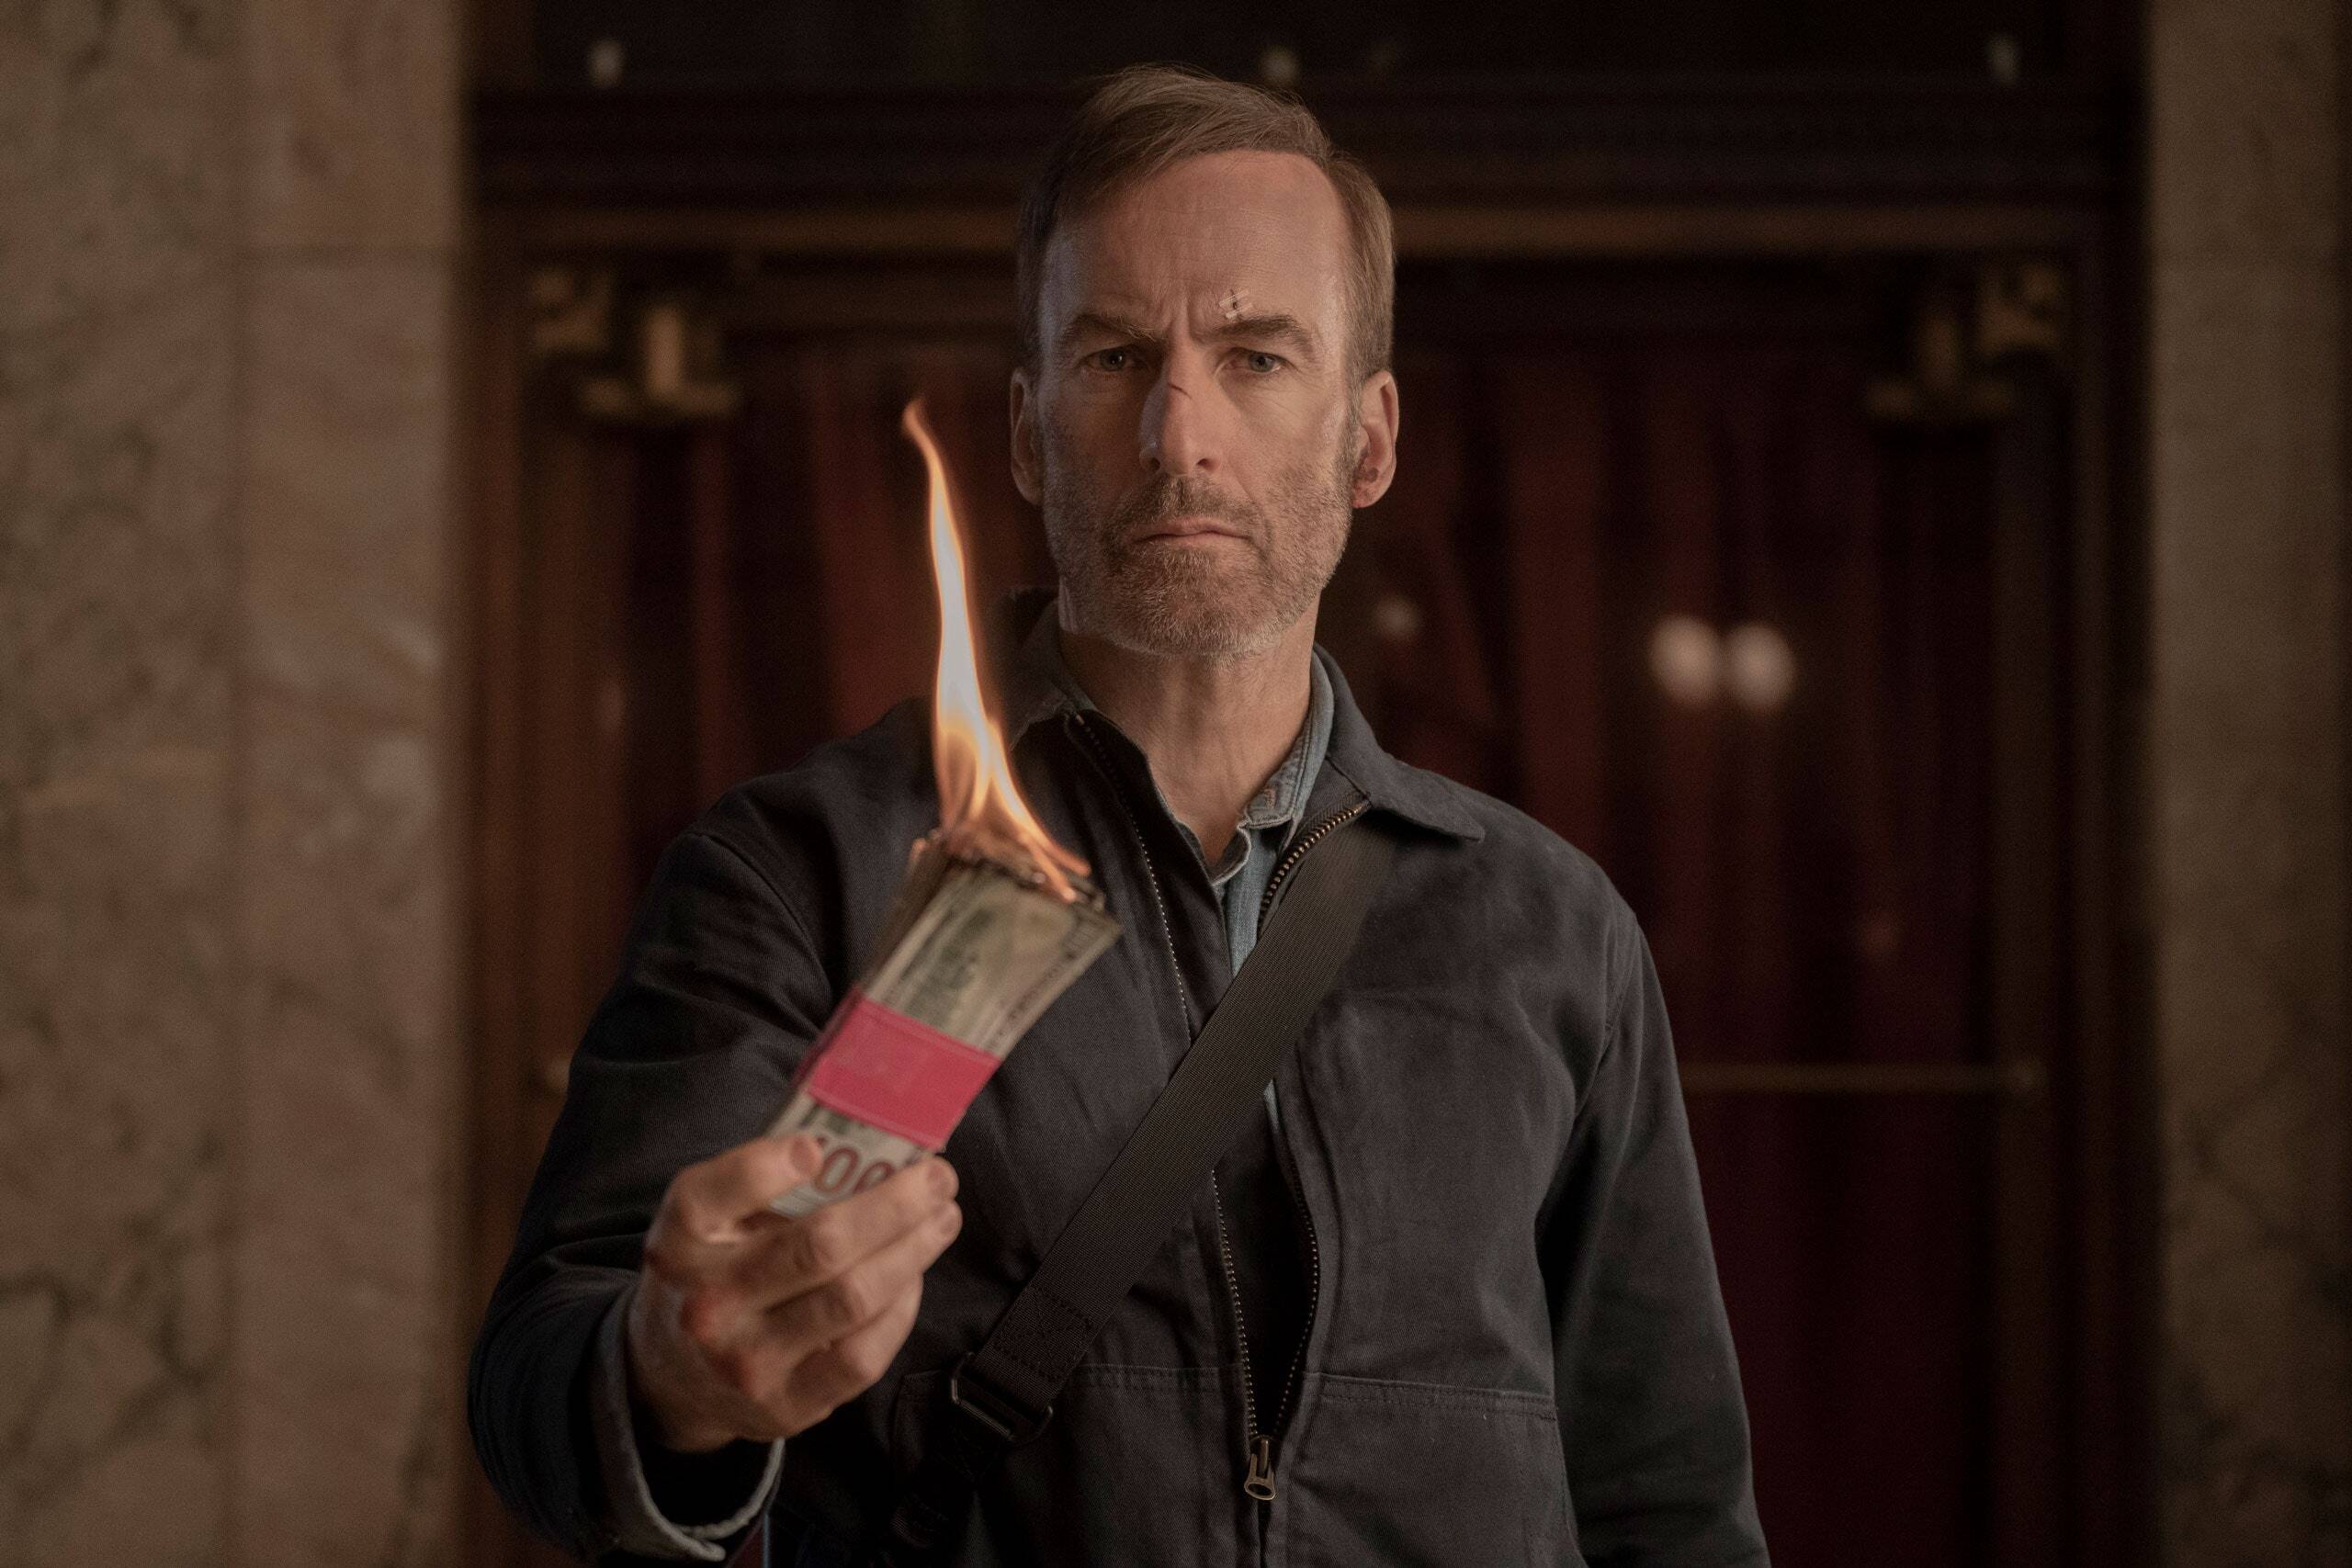 Bob Odenkirk plays a victim of a break-in, an incident that drives him to violent revenge, in ‘Nobody’